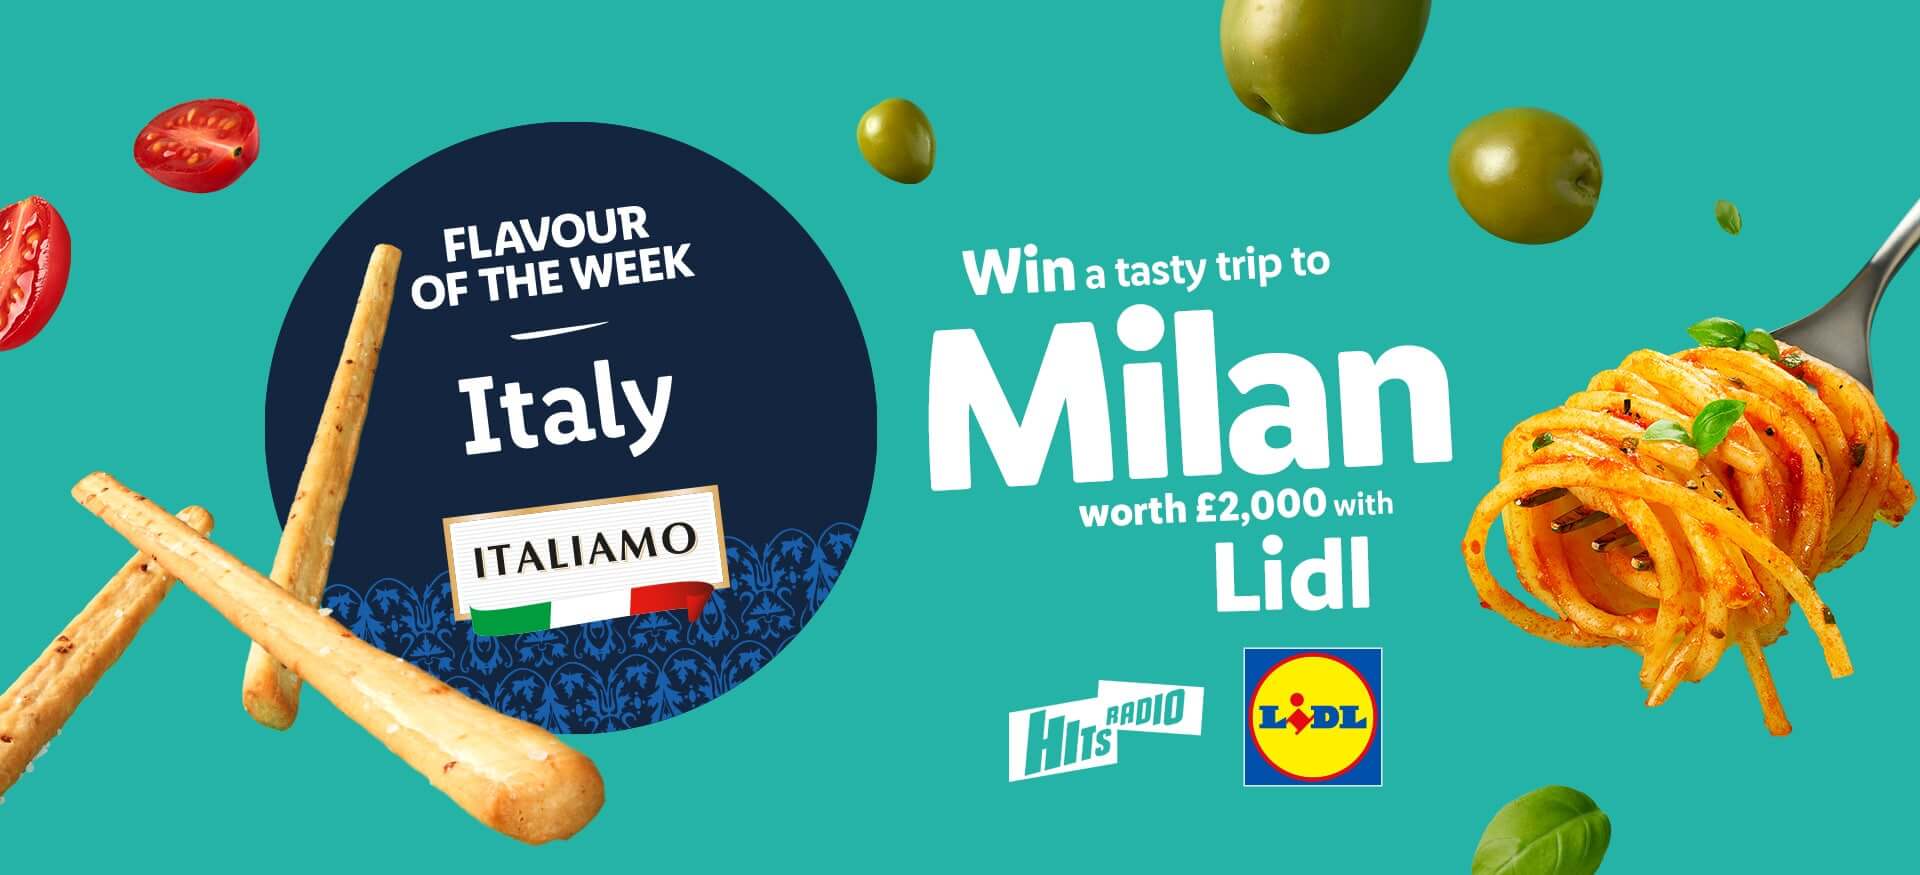 Win a tasty trip to Milan with Lidl and Hits Radio